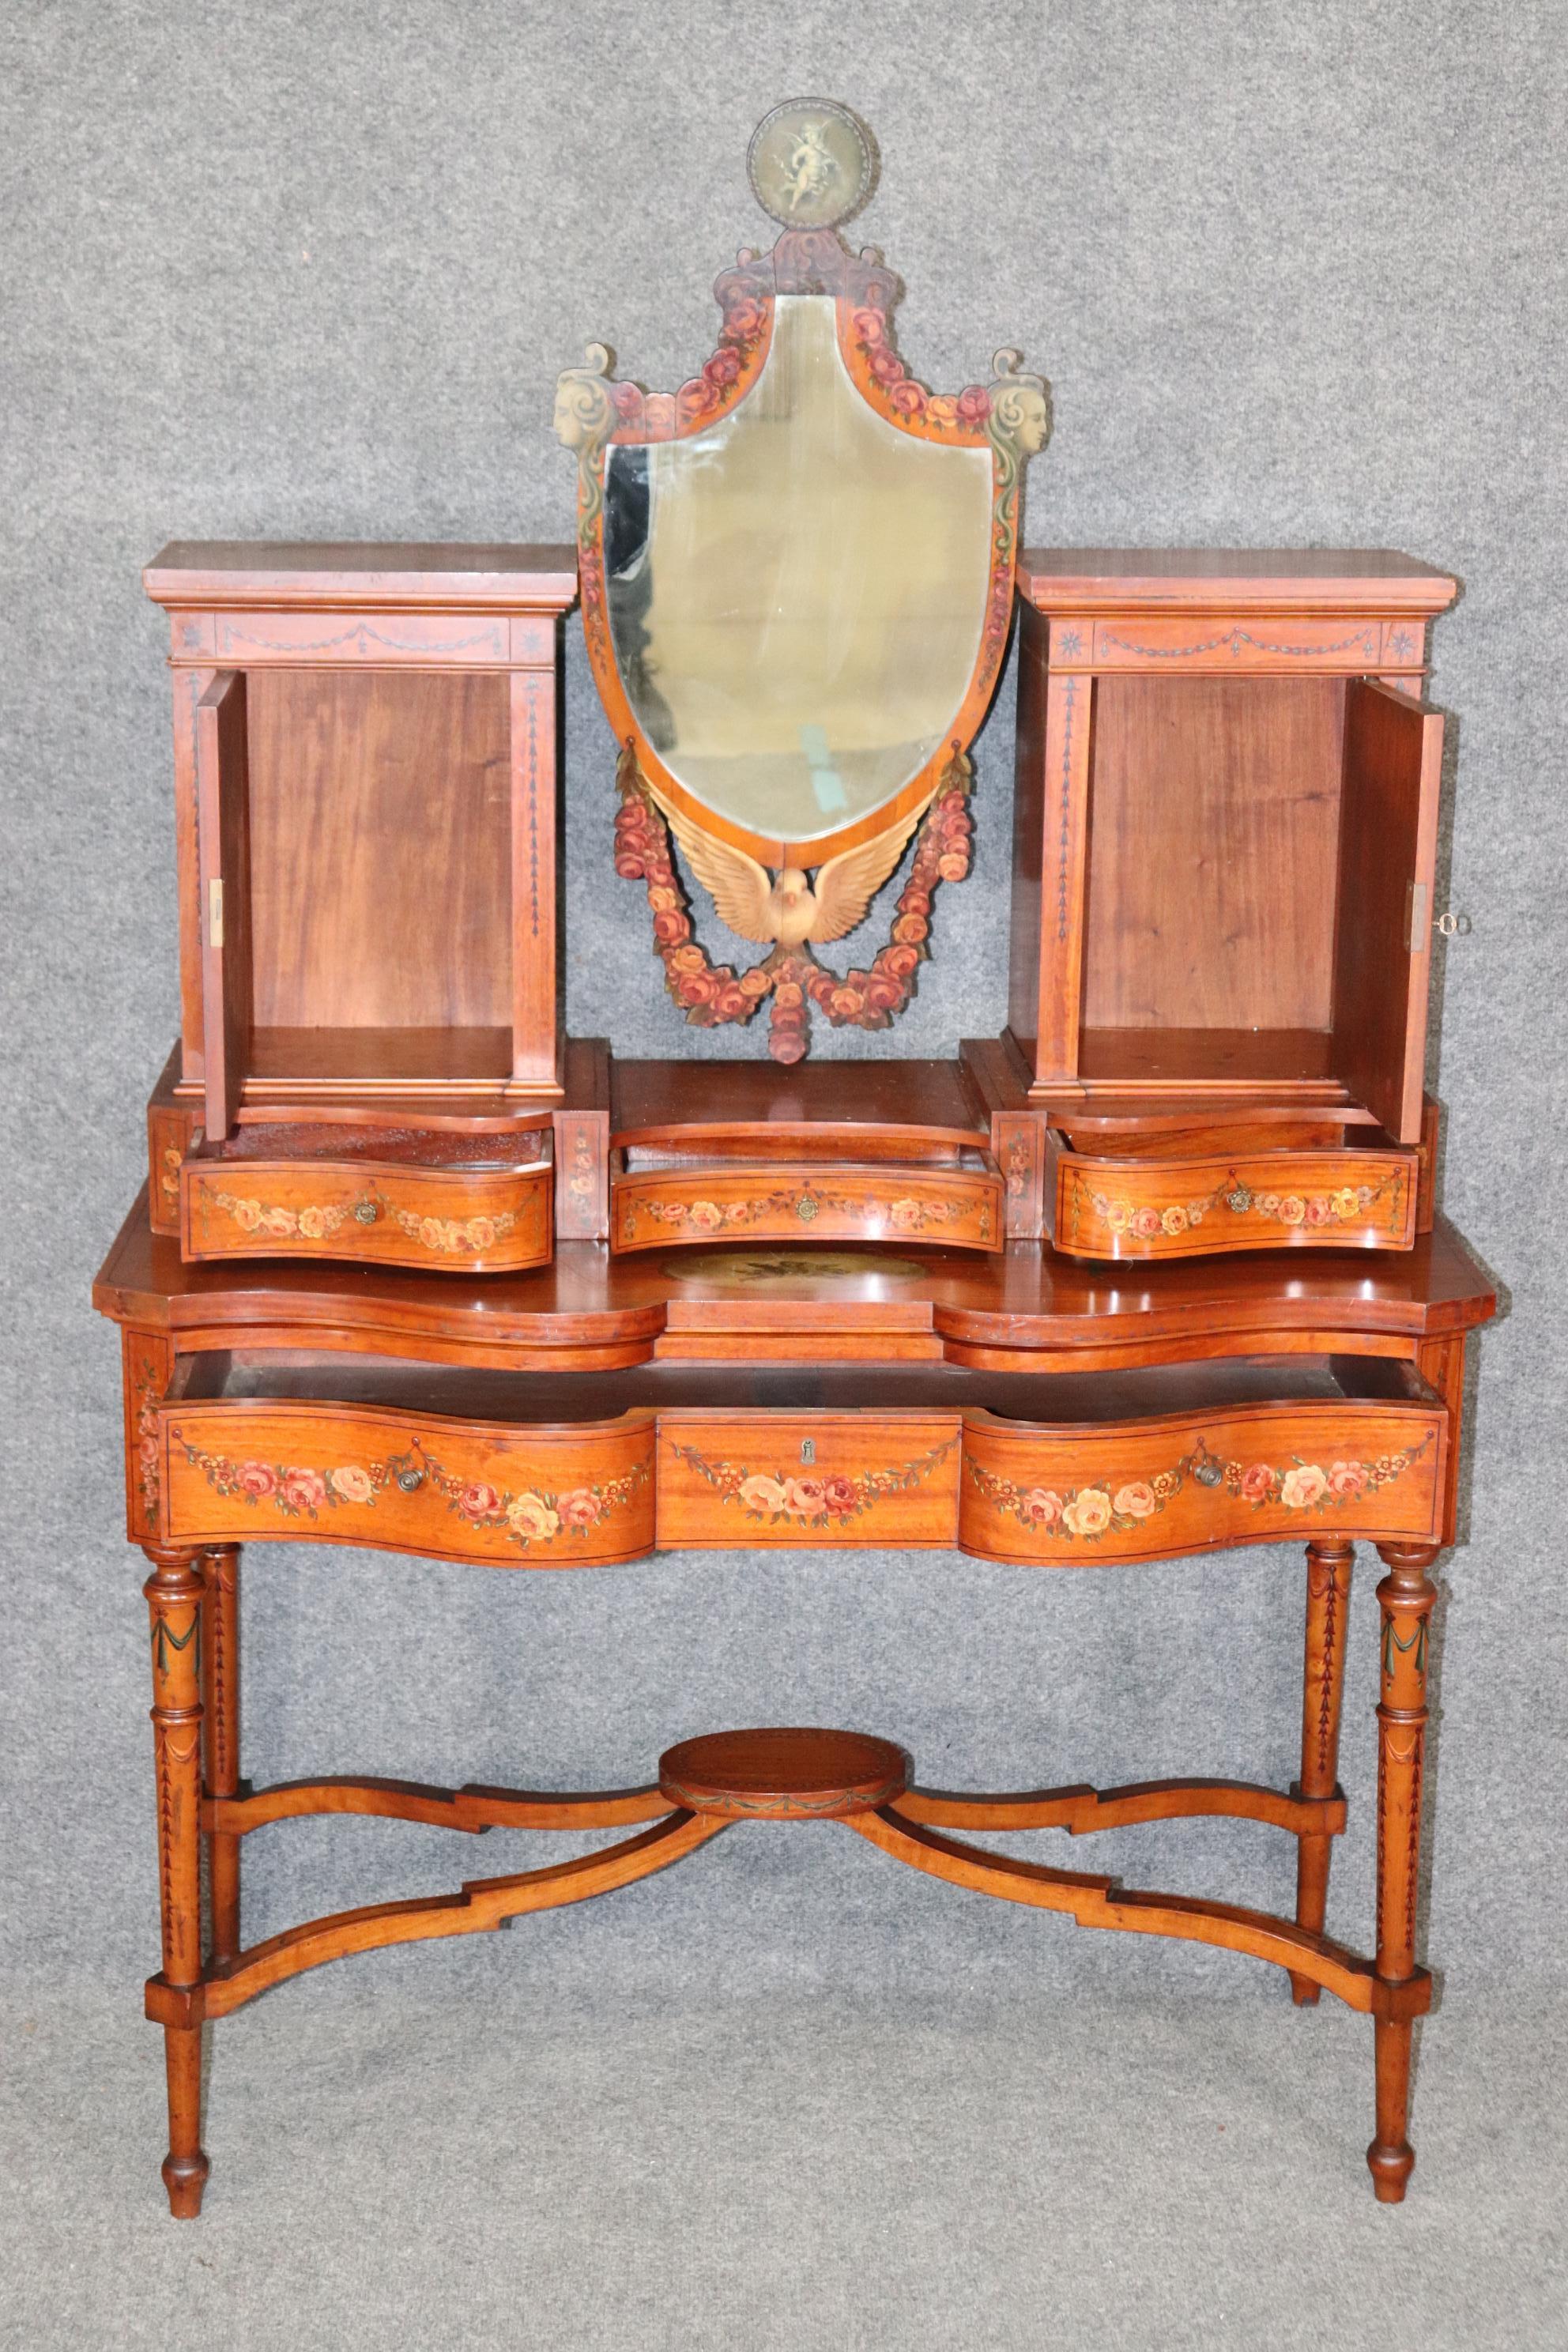 Fine Quality Gillow & Co Satinwood Paint Decorated Ladies Vanity Circa 1890s For Sale 1